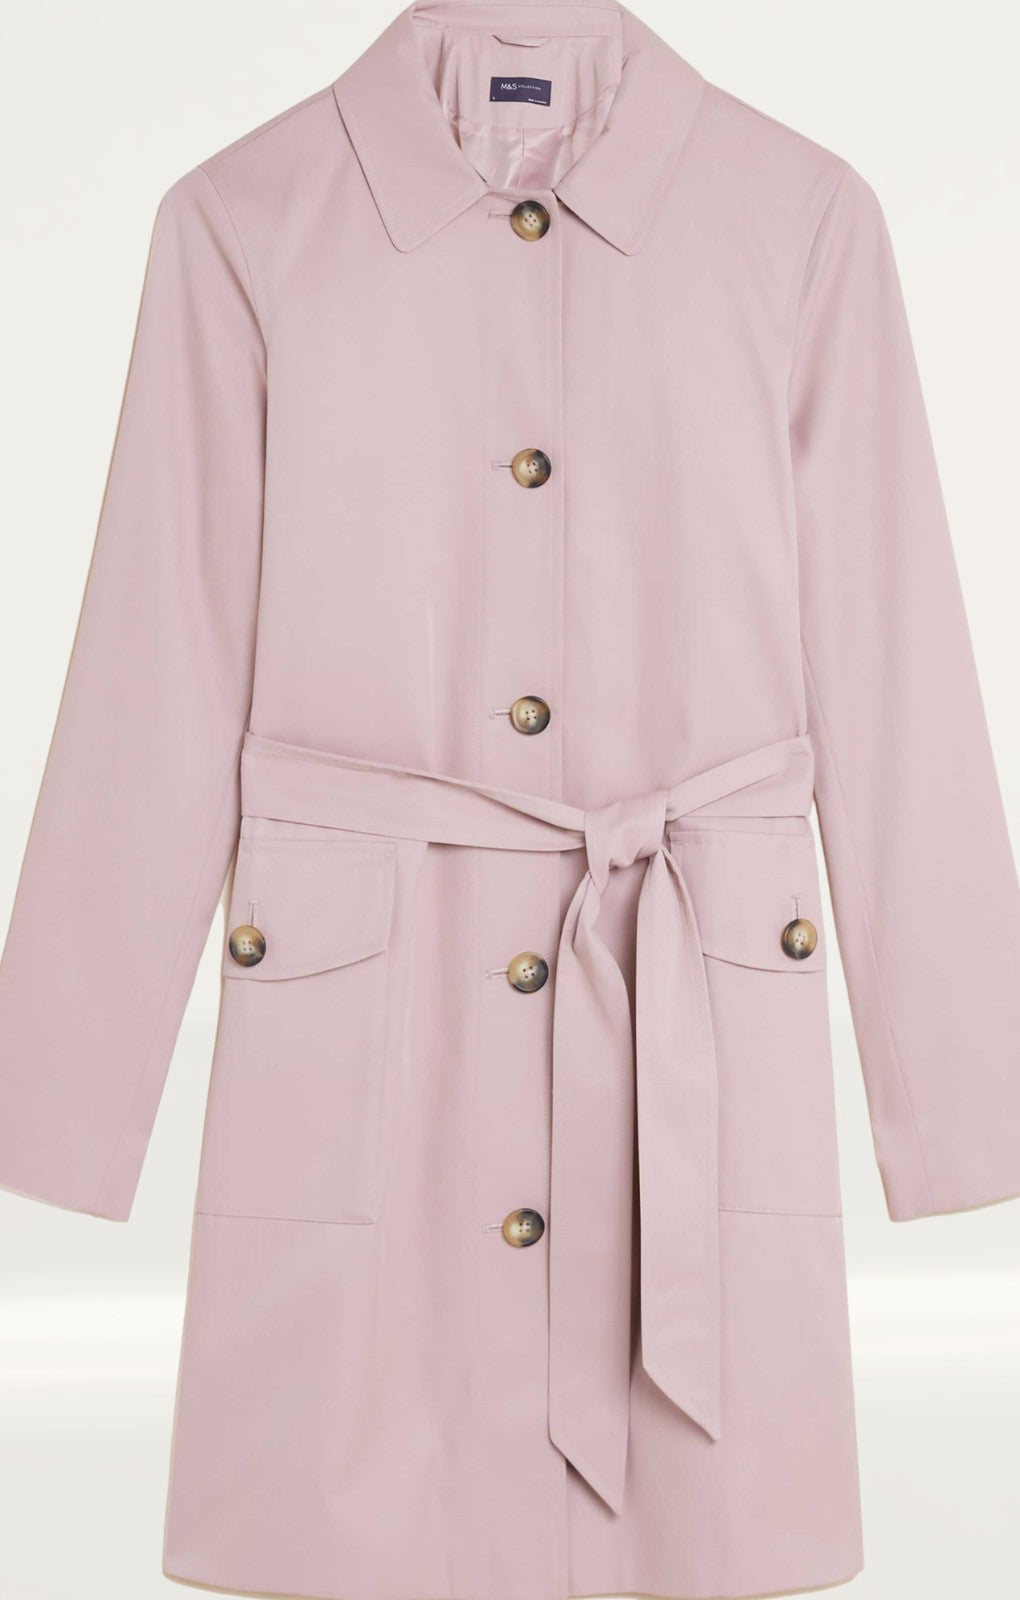 M&S Dusty Pink Trench product image